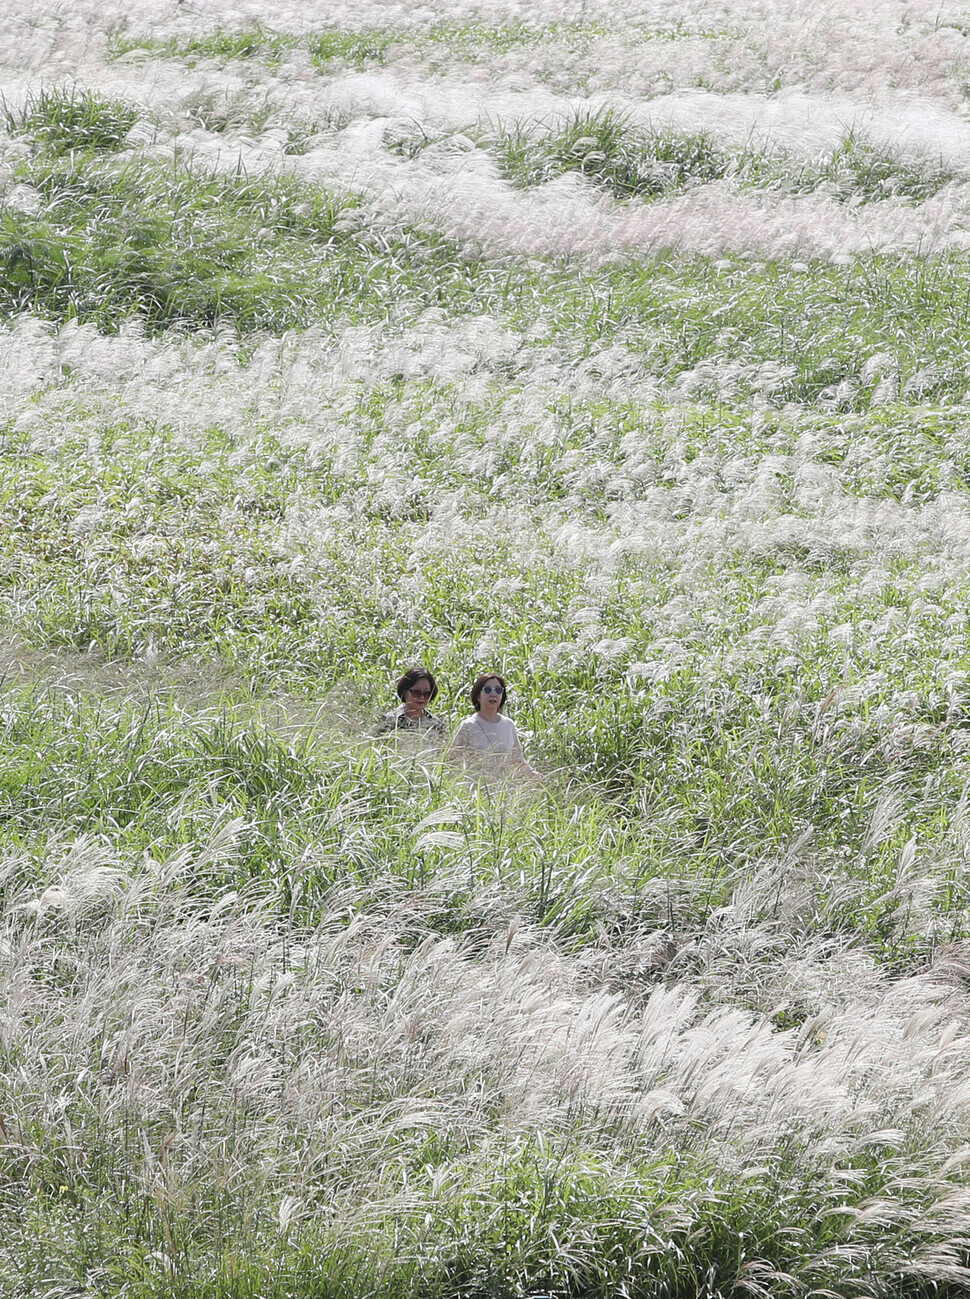 Two people walk through a field of silvergrass at Seoul’s Haneul Park on Sept. 20. (Shin So-young/The Hankyoreh)